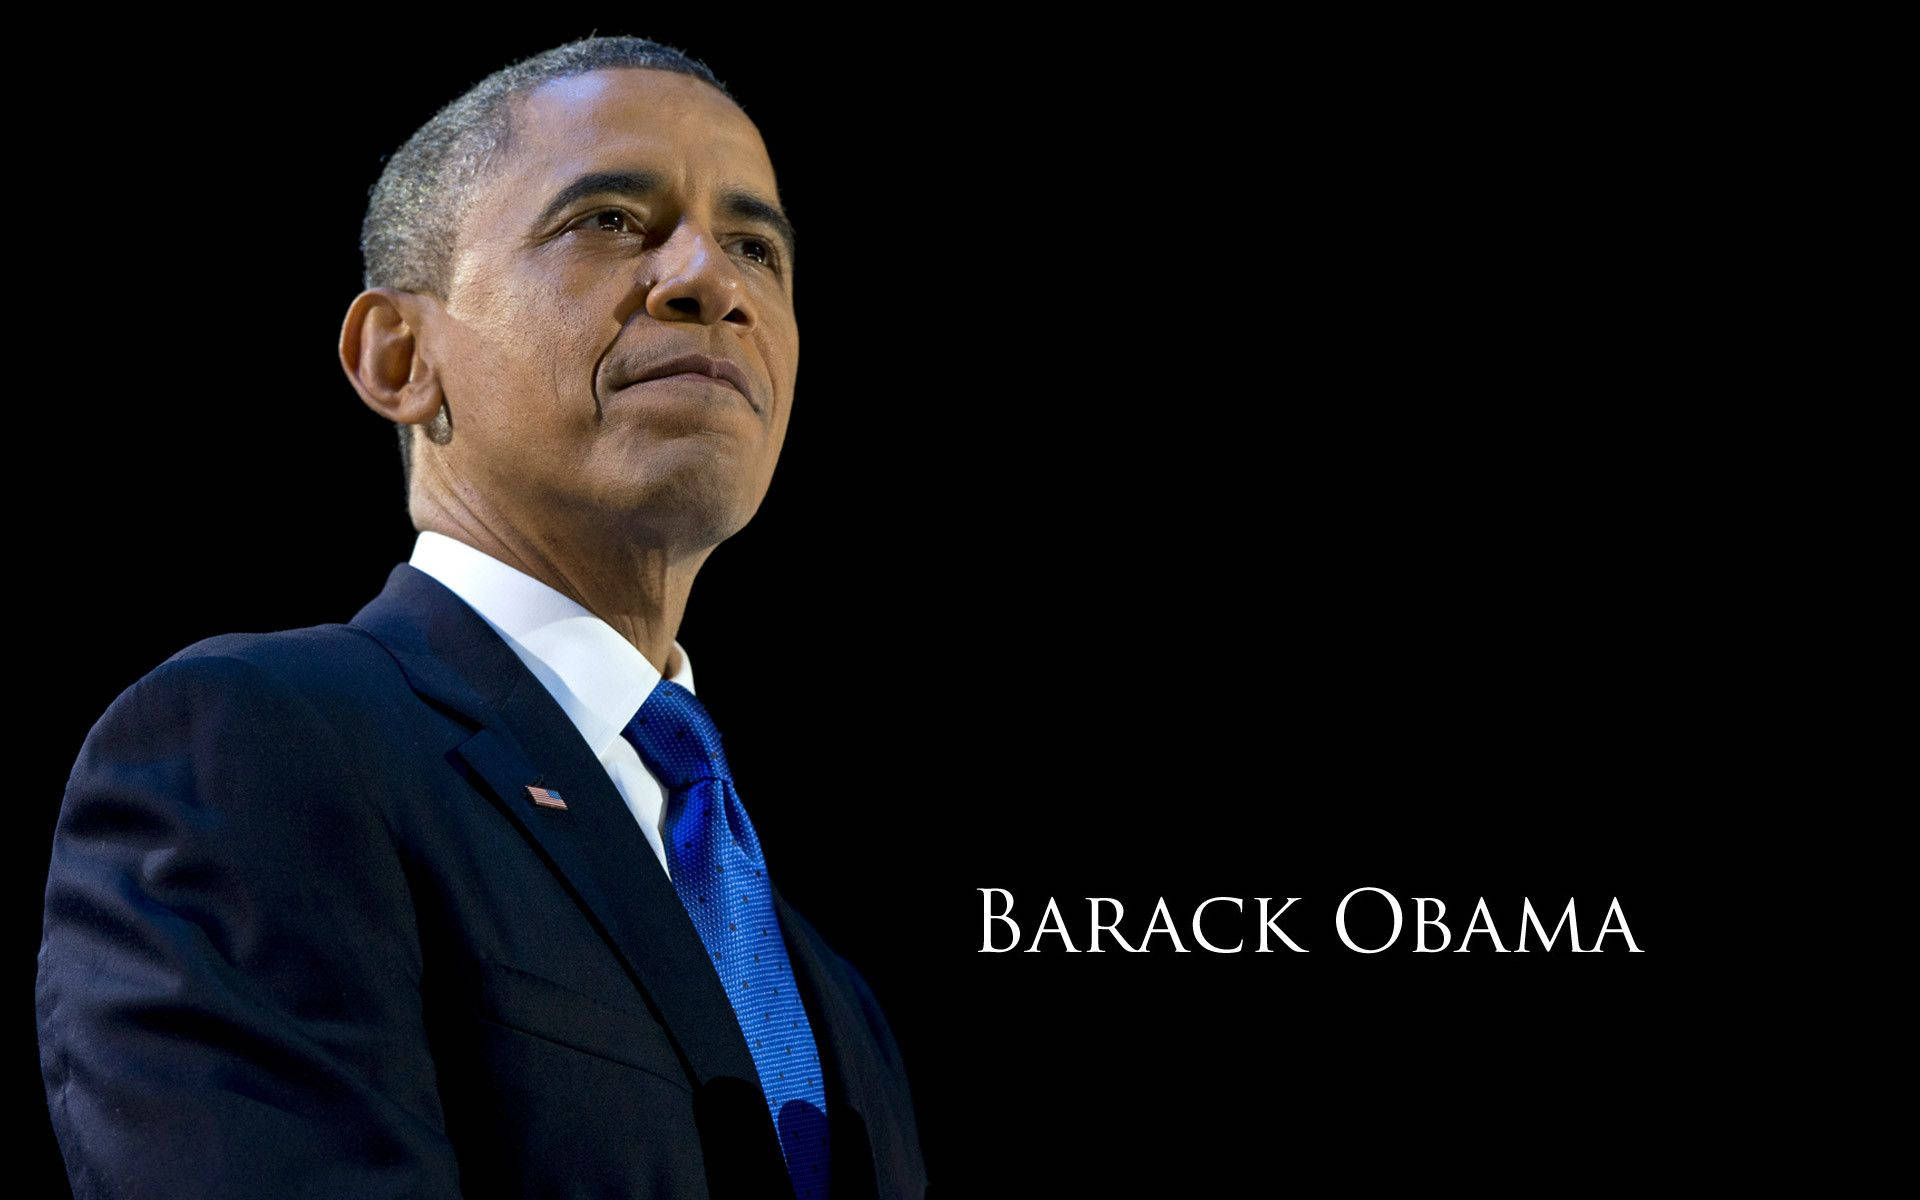 Barack Obama With Persian Blue Tie Background